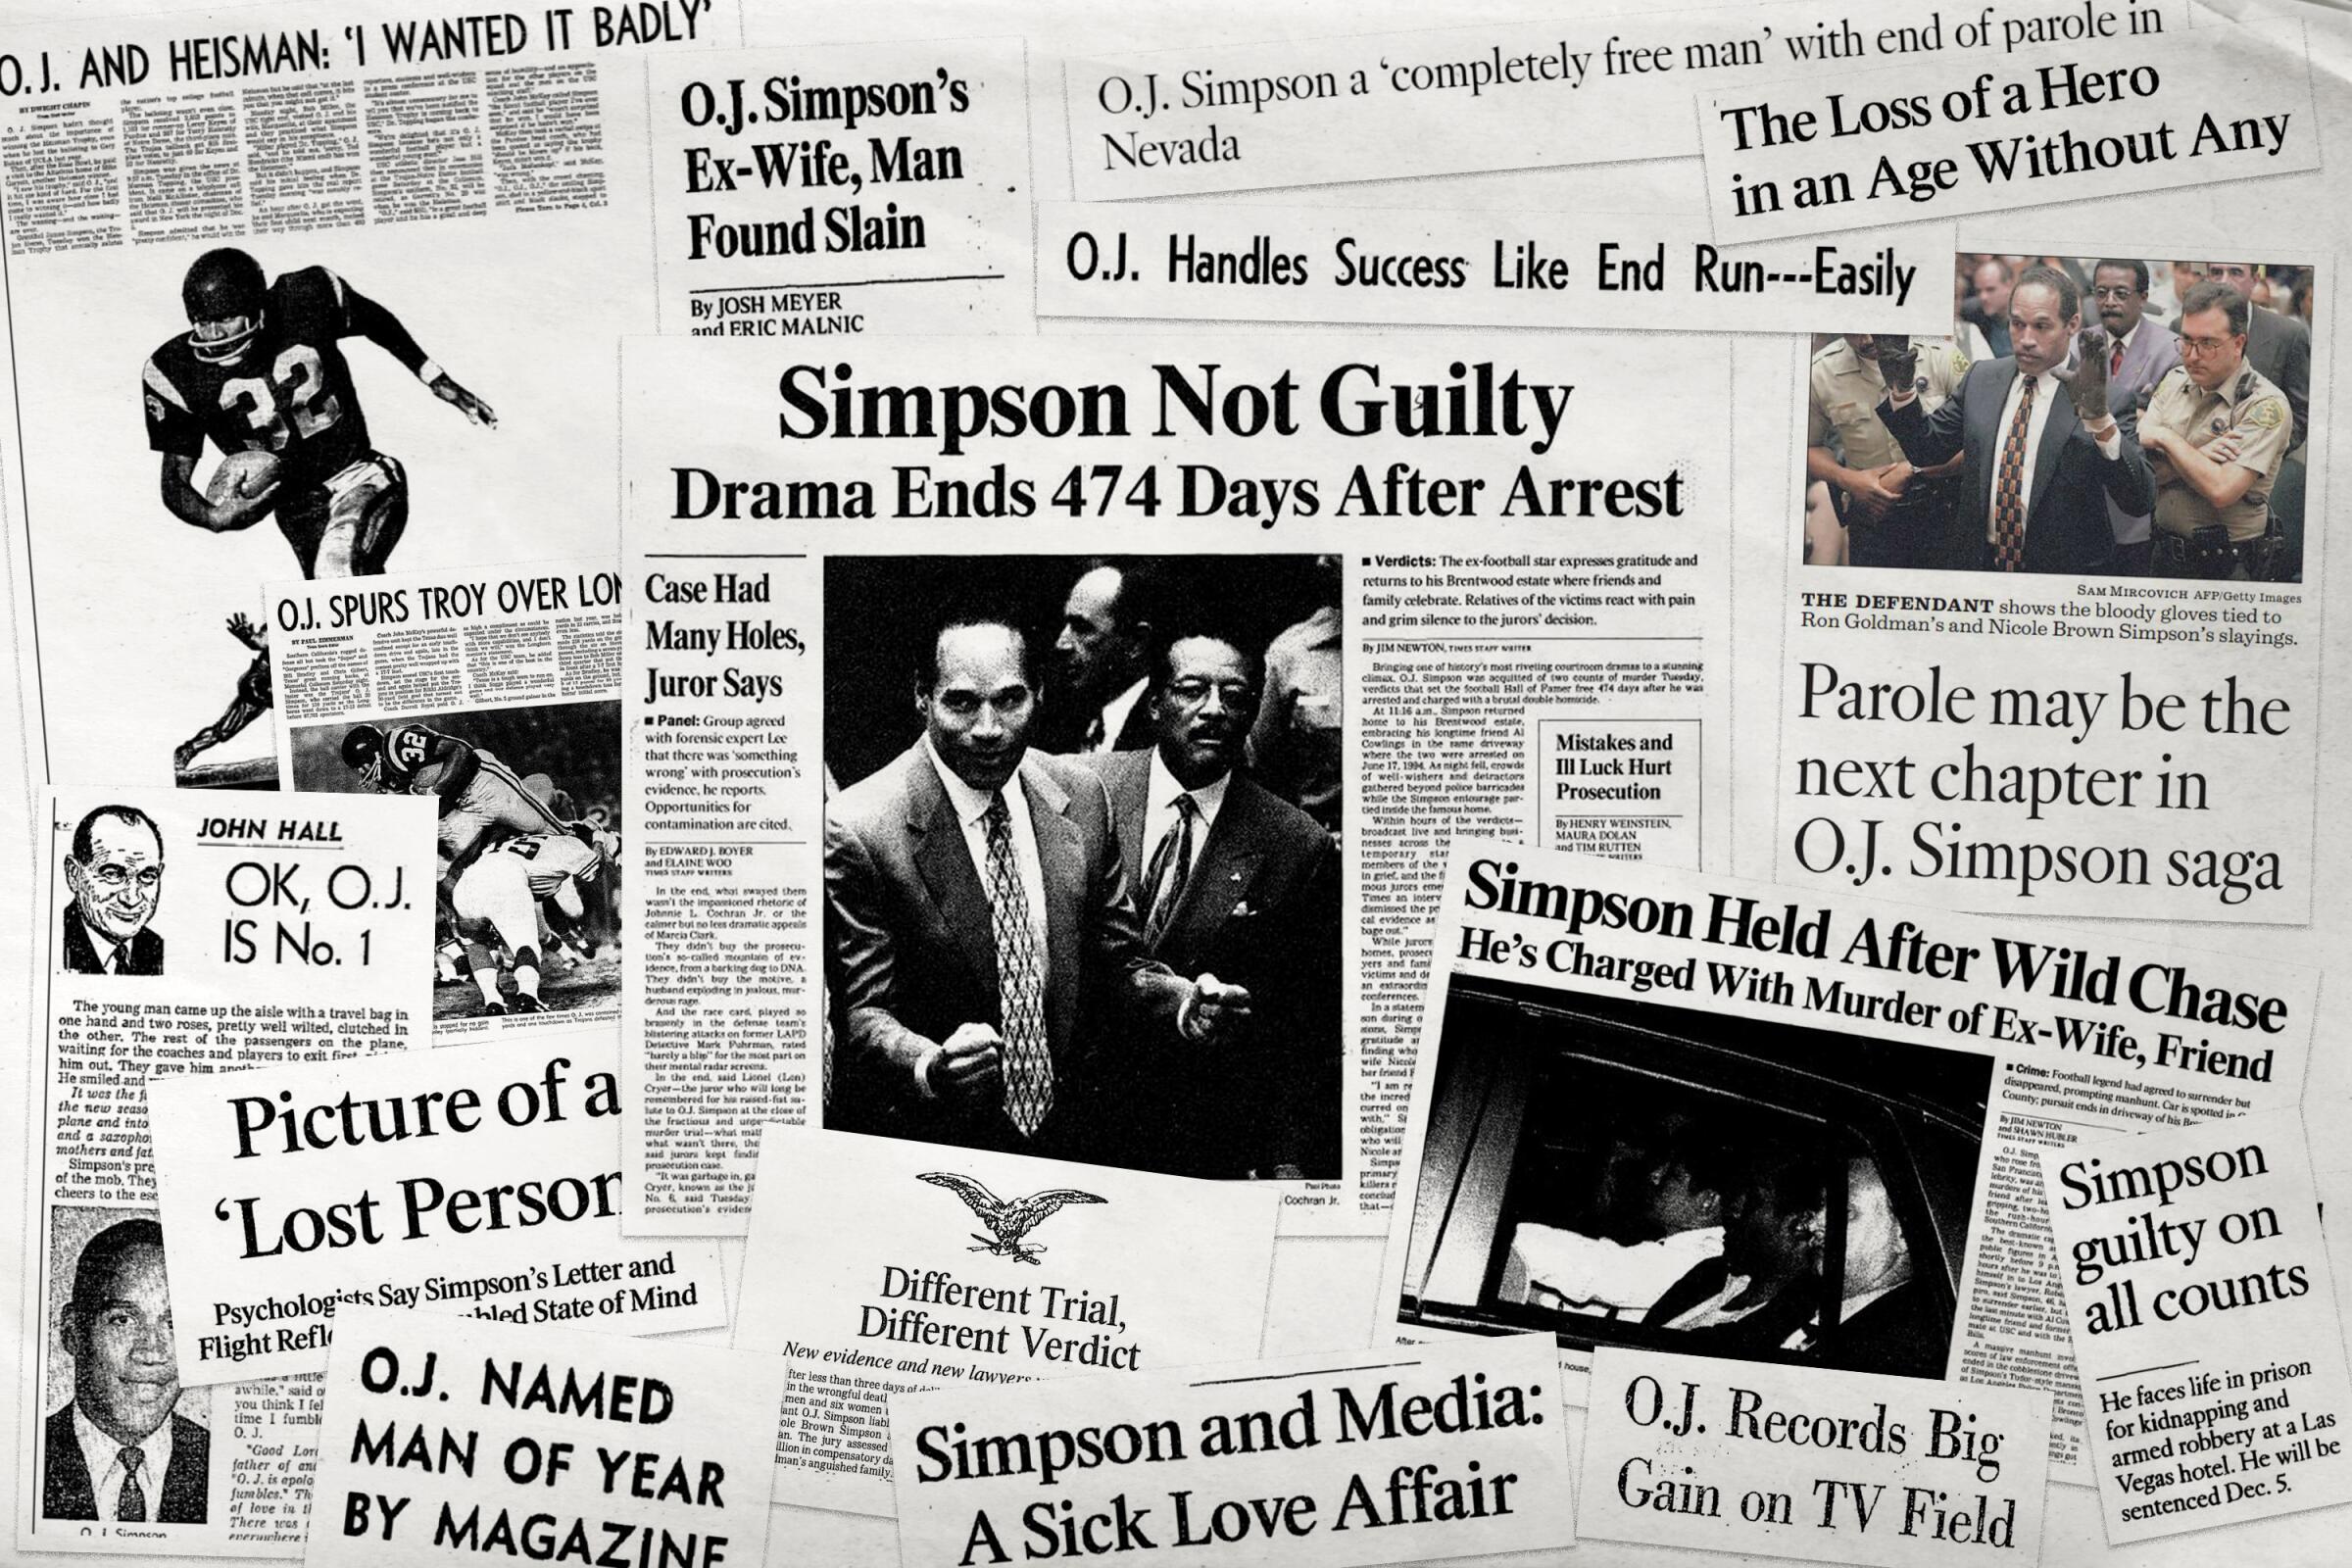 photo collage of Los Angeles Times headlines about O.J. Simpson